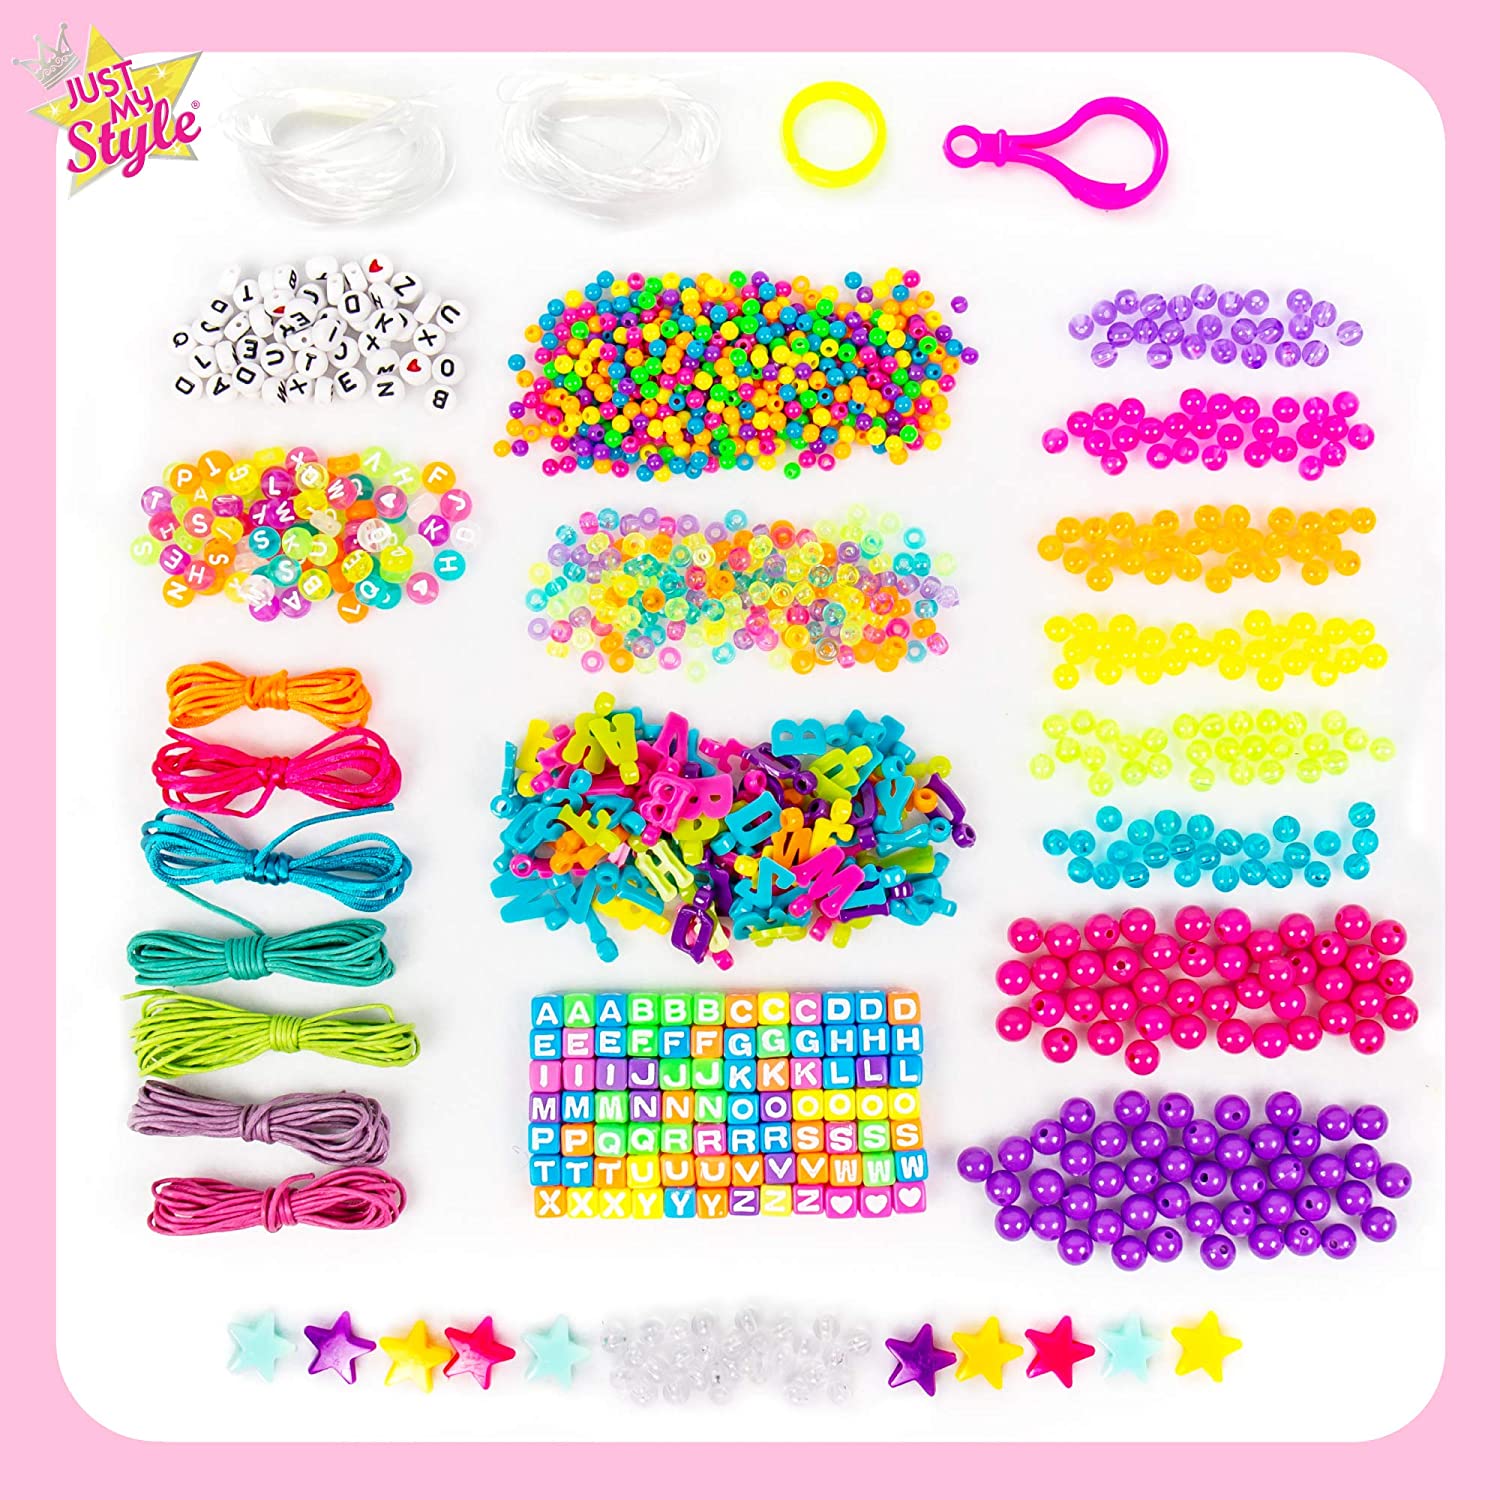 ABC Beads by Horizon Group Usa 1000+ Charms & Beads Alphabet Charms, Accent Beads Seed Beads